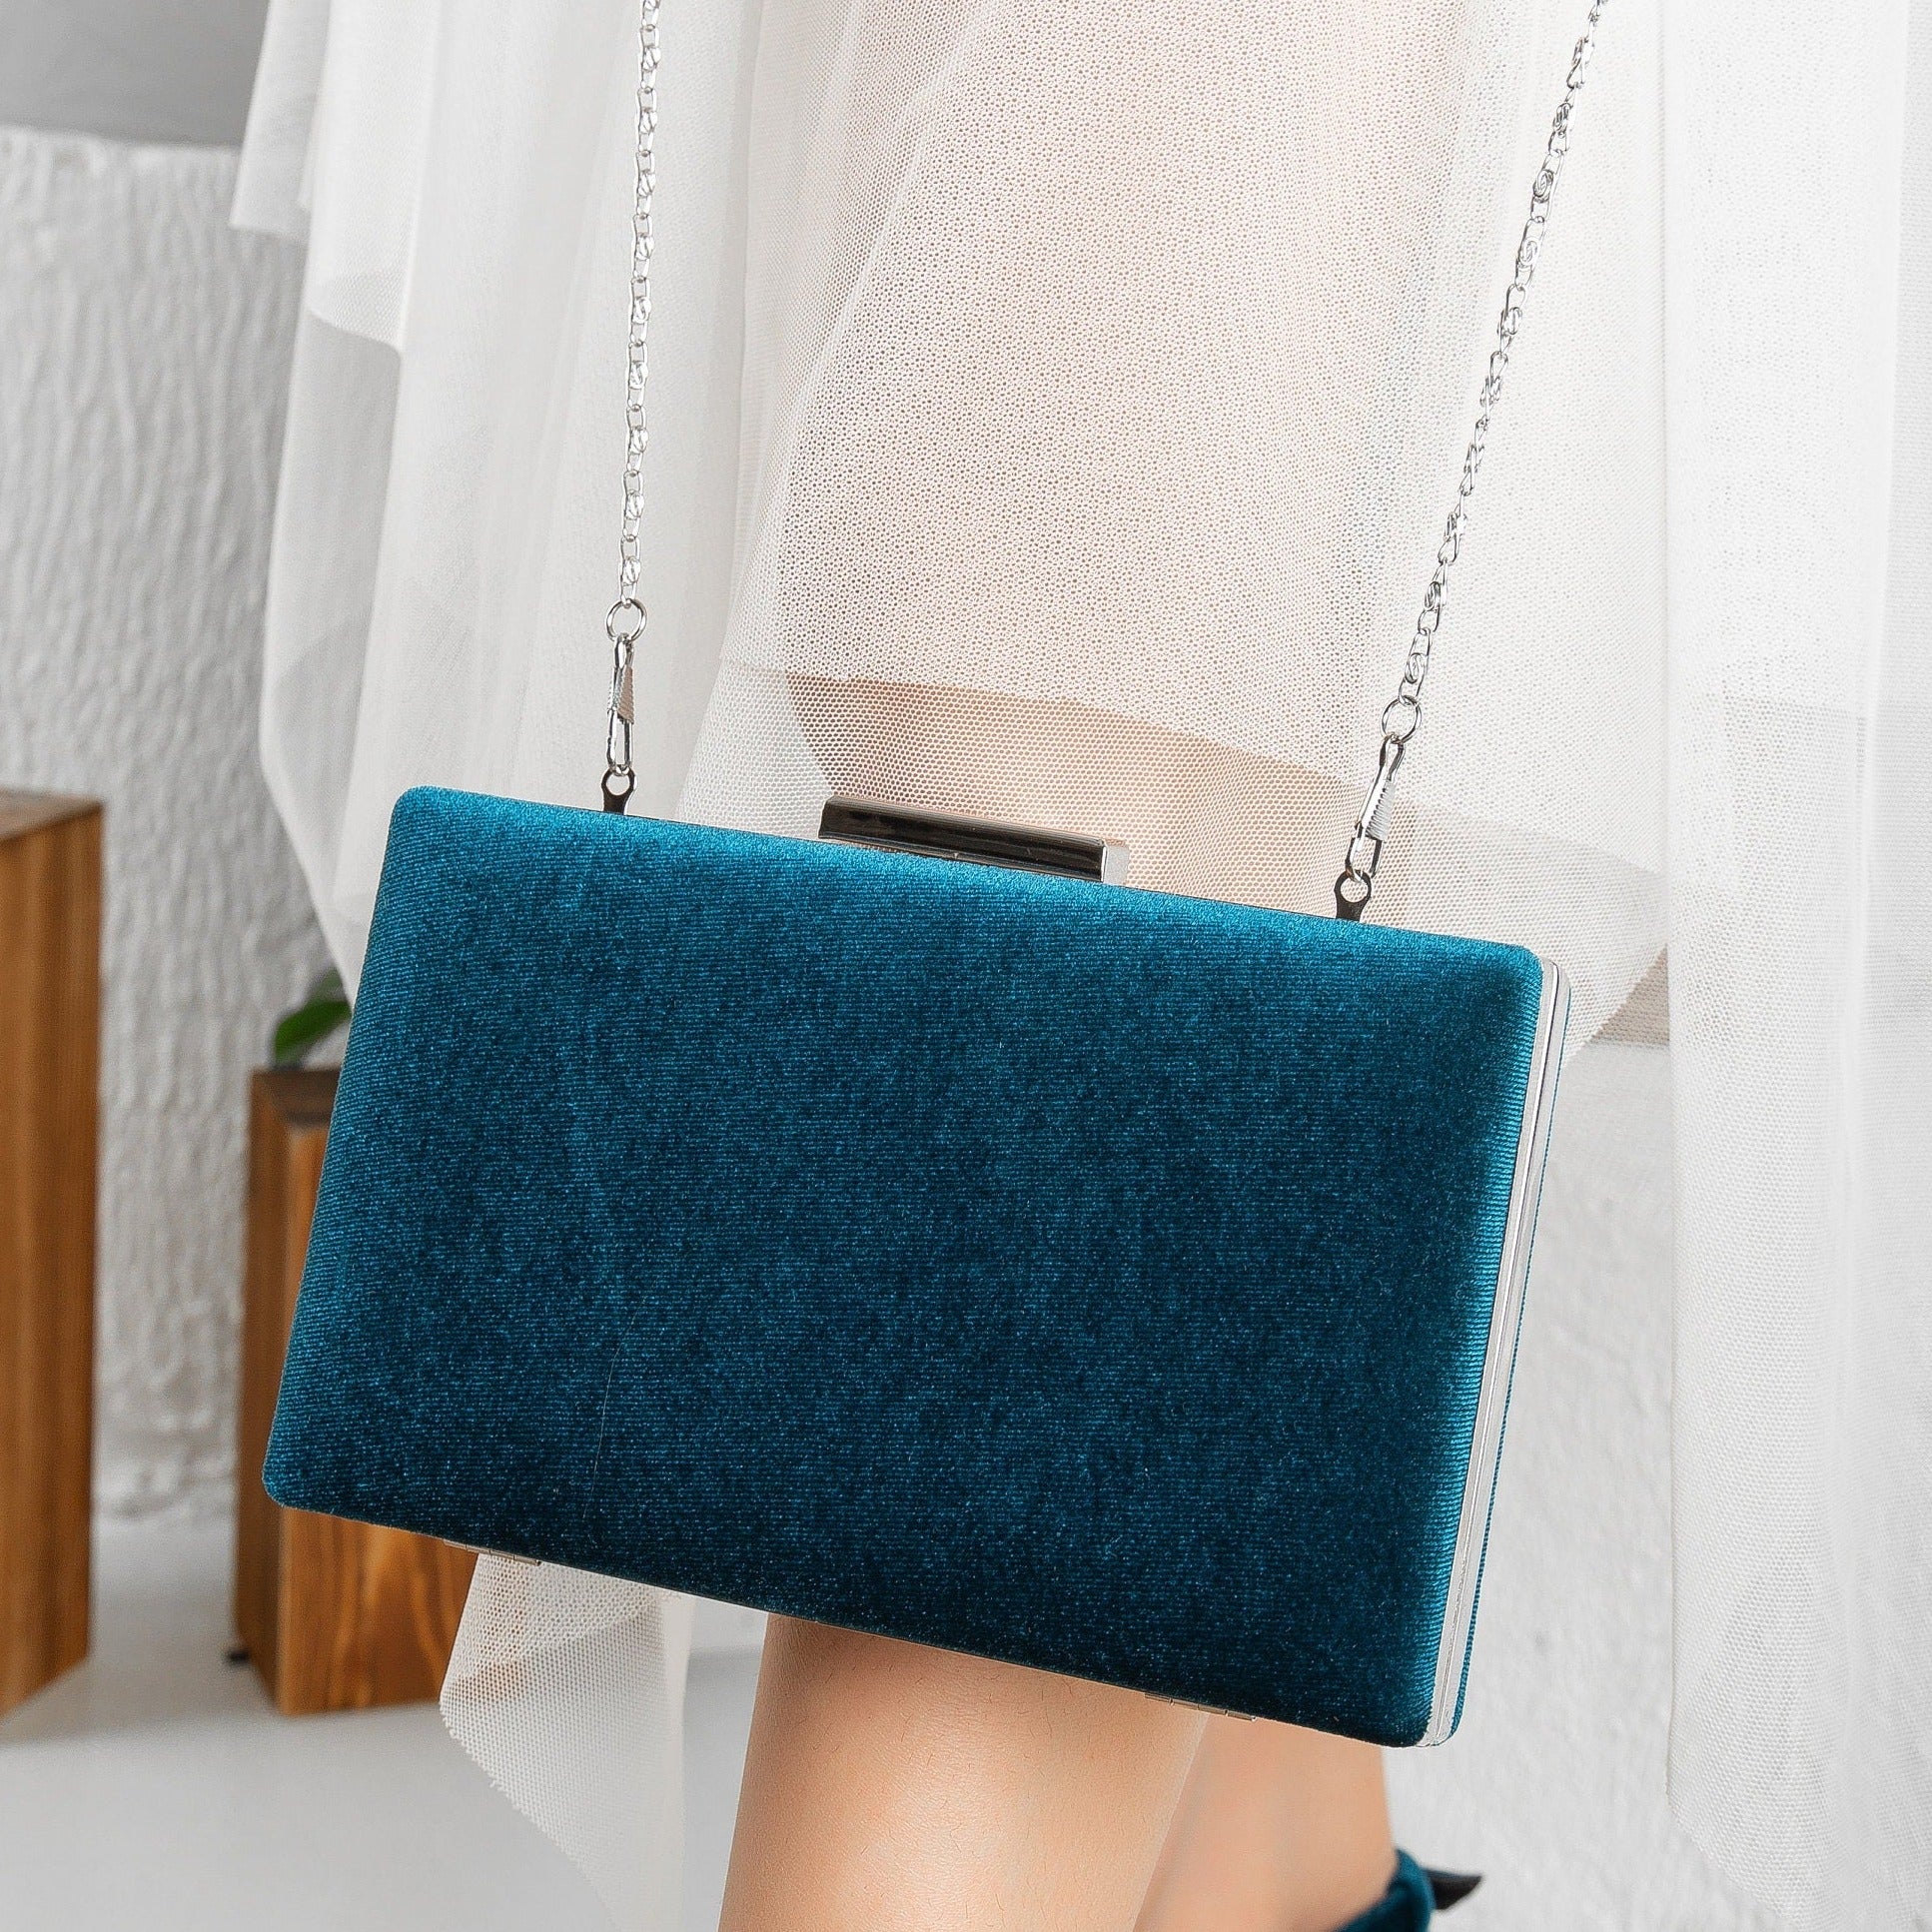 Buy Anekaant Ethnique Blue And Green Party Clutch Bag Online